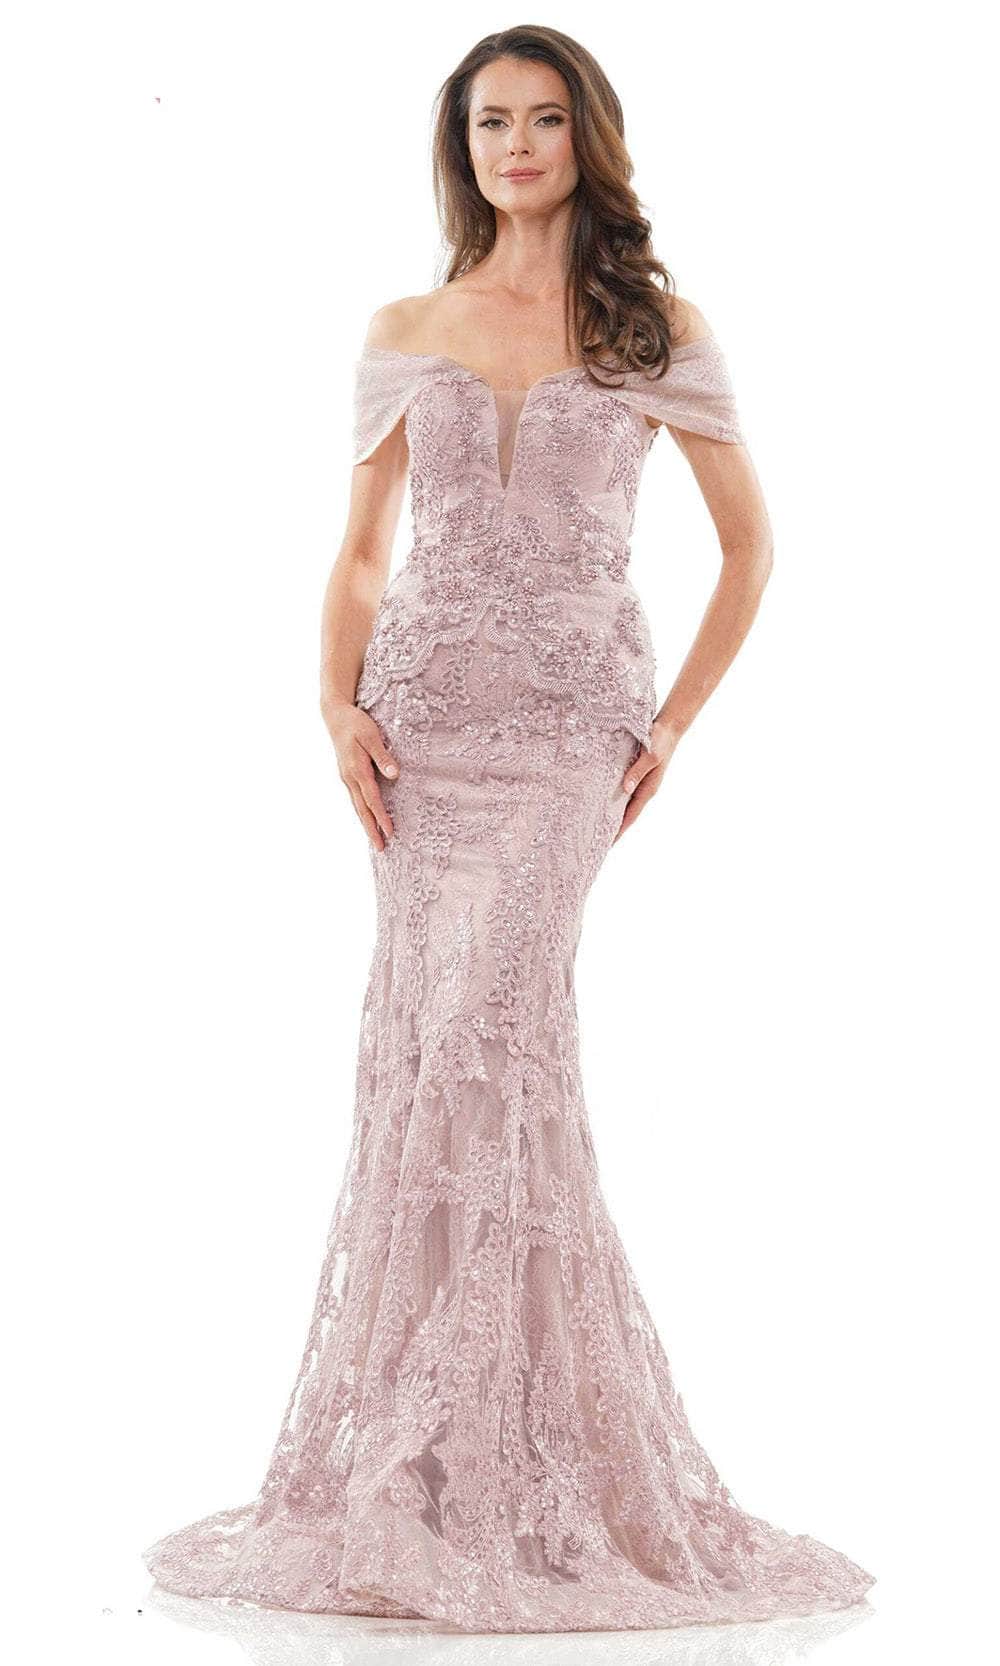 Image of Marsoni by Colors MV1256 - Plunging Beaded Lace Formal Gown